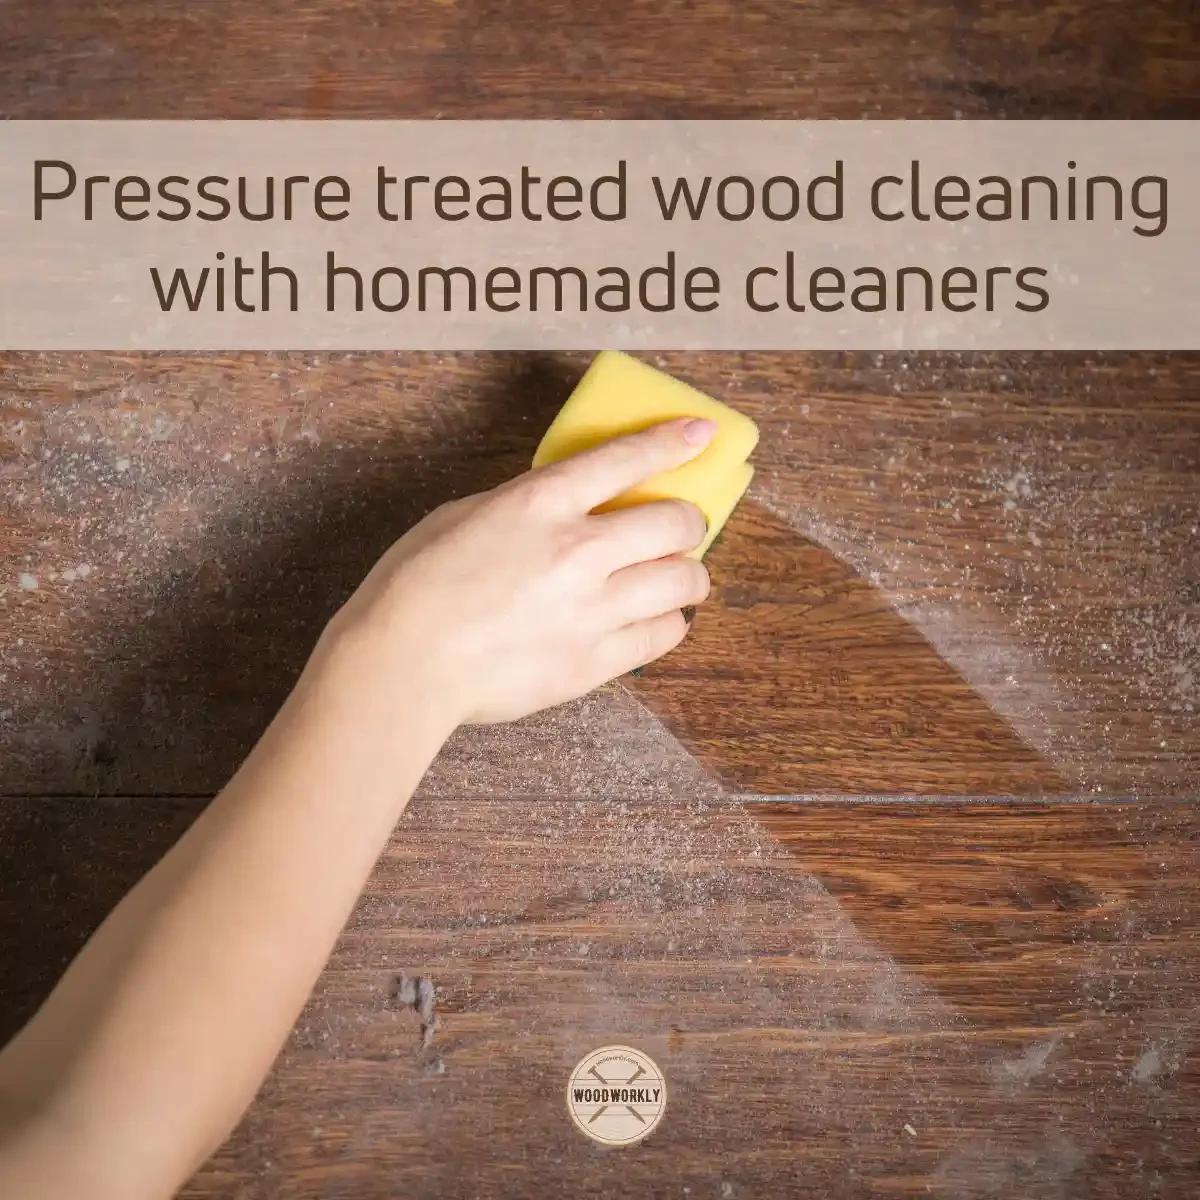 Pressure treated wood cleaning with home made cleaners